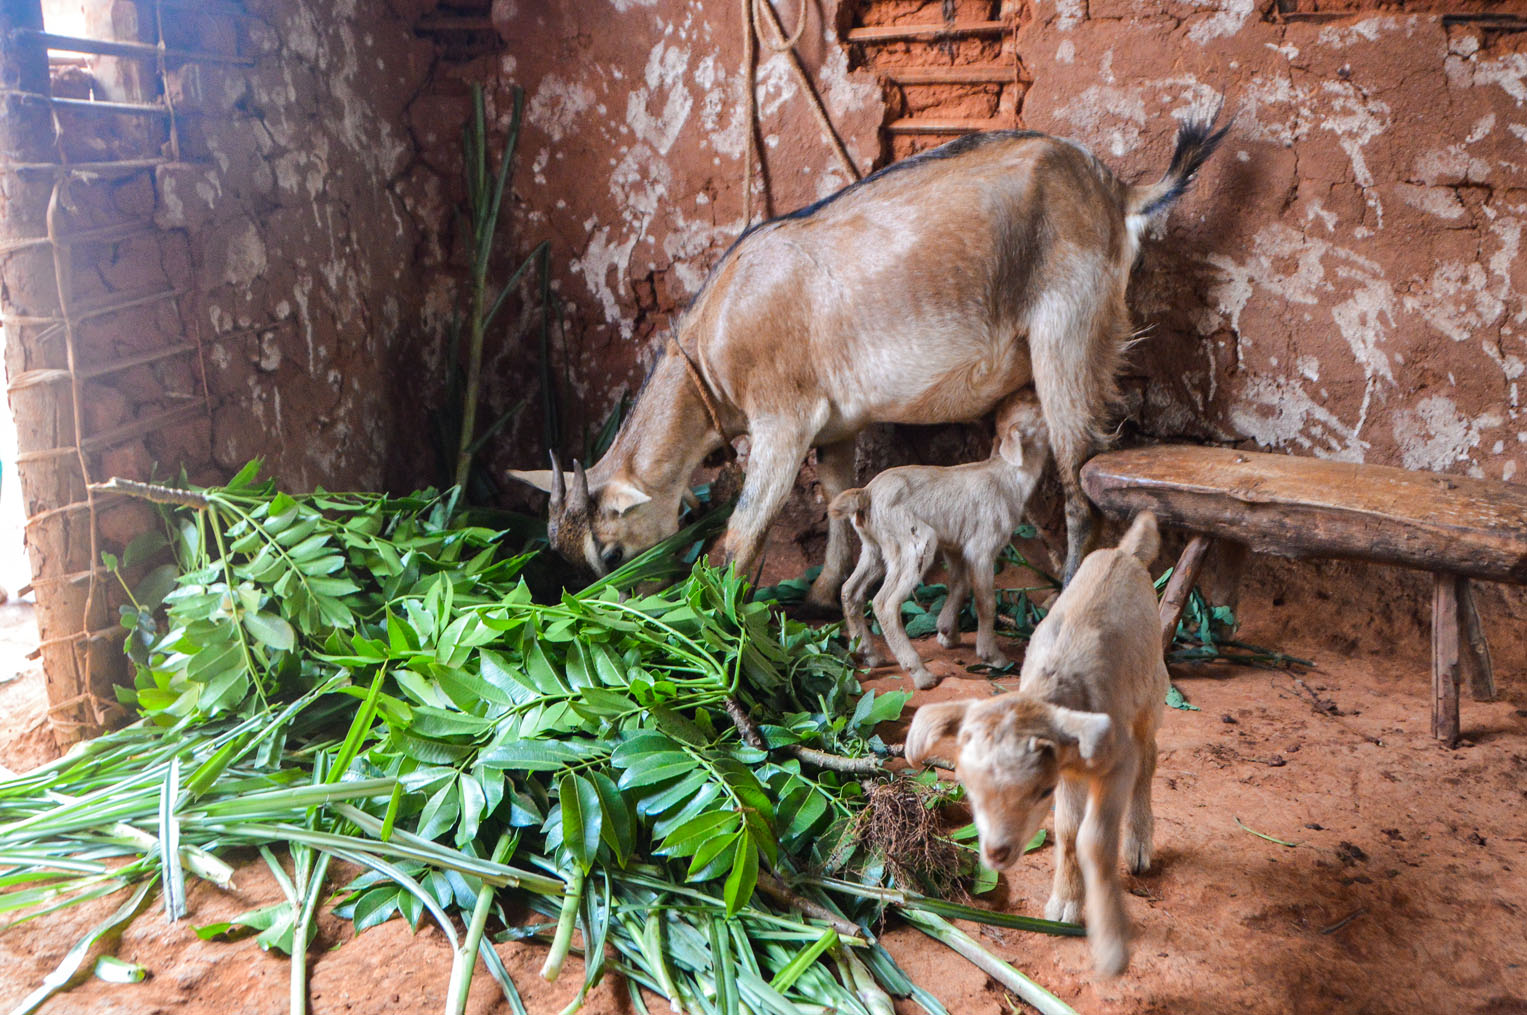 Goats are having families, too, providing an ongoing source of nutrition and income for families in need.